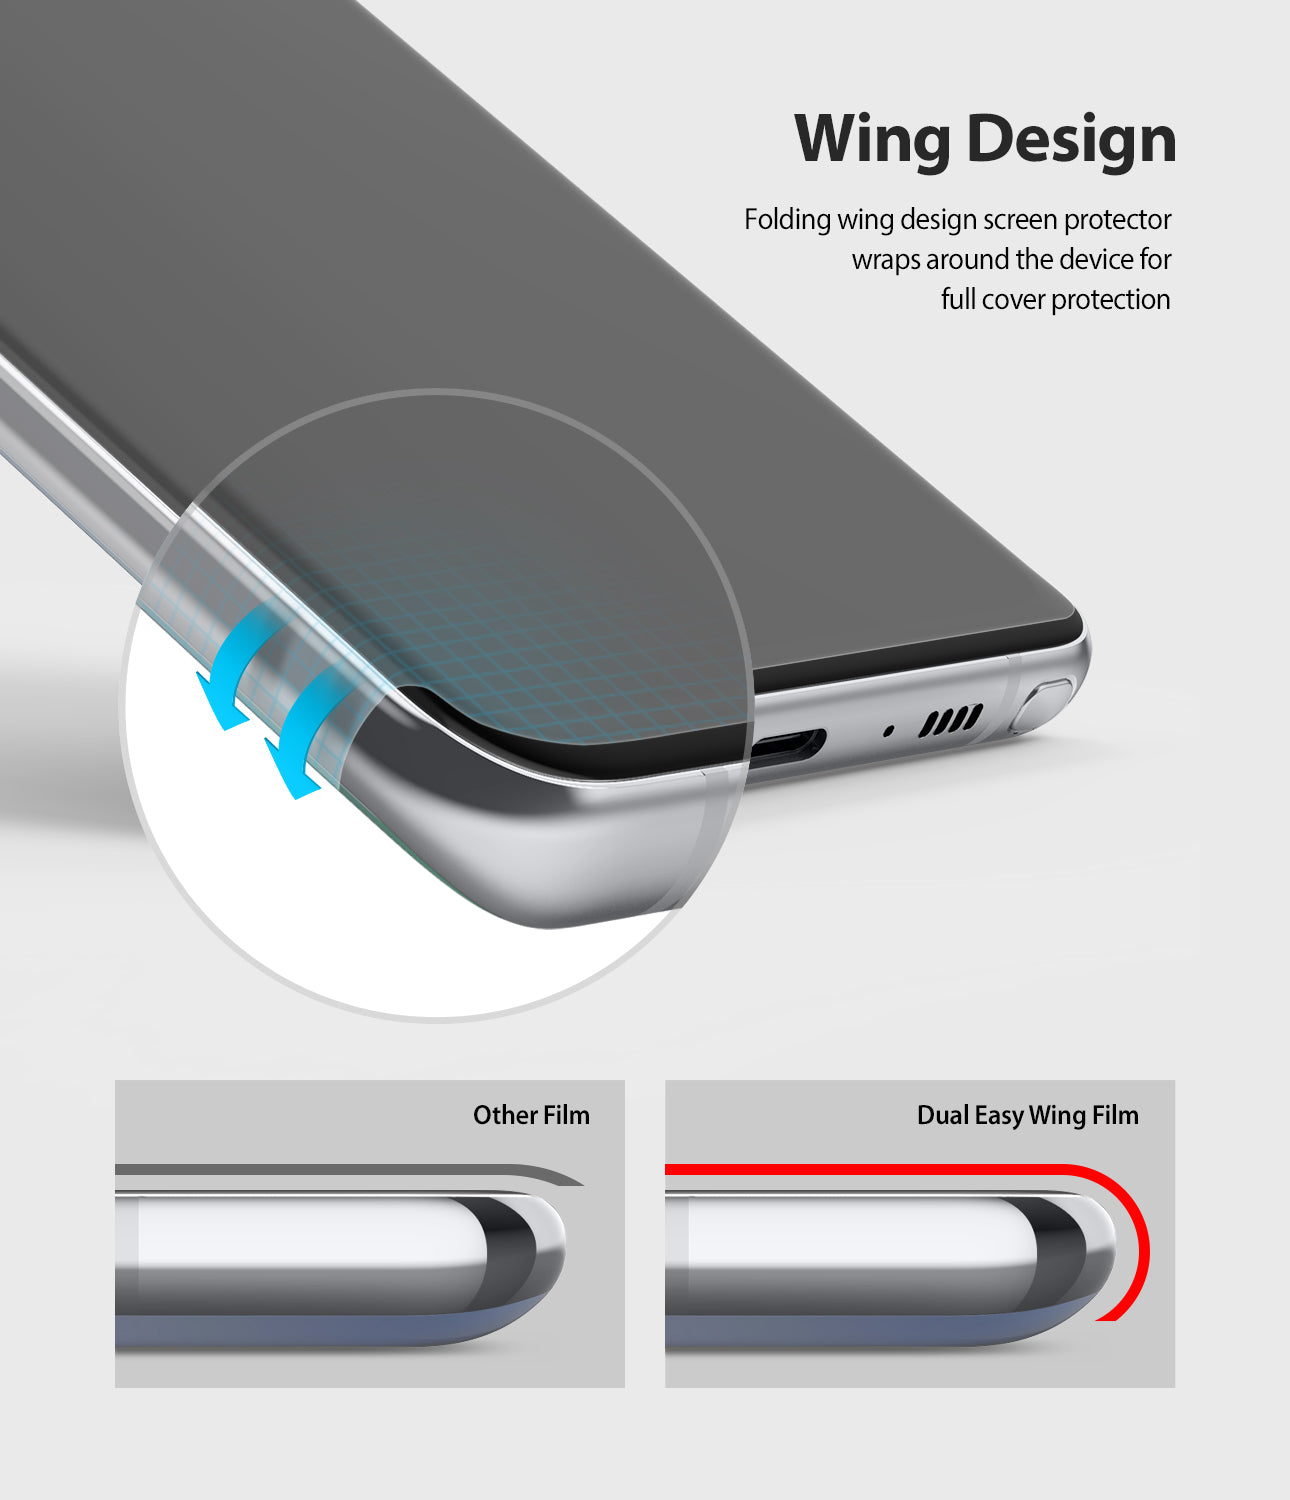 folding wing design screen protection wraps around the device for full cover protection